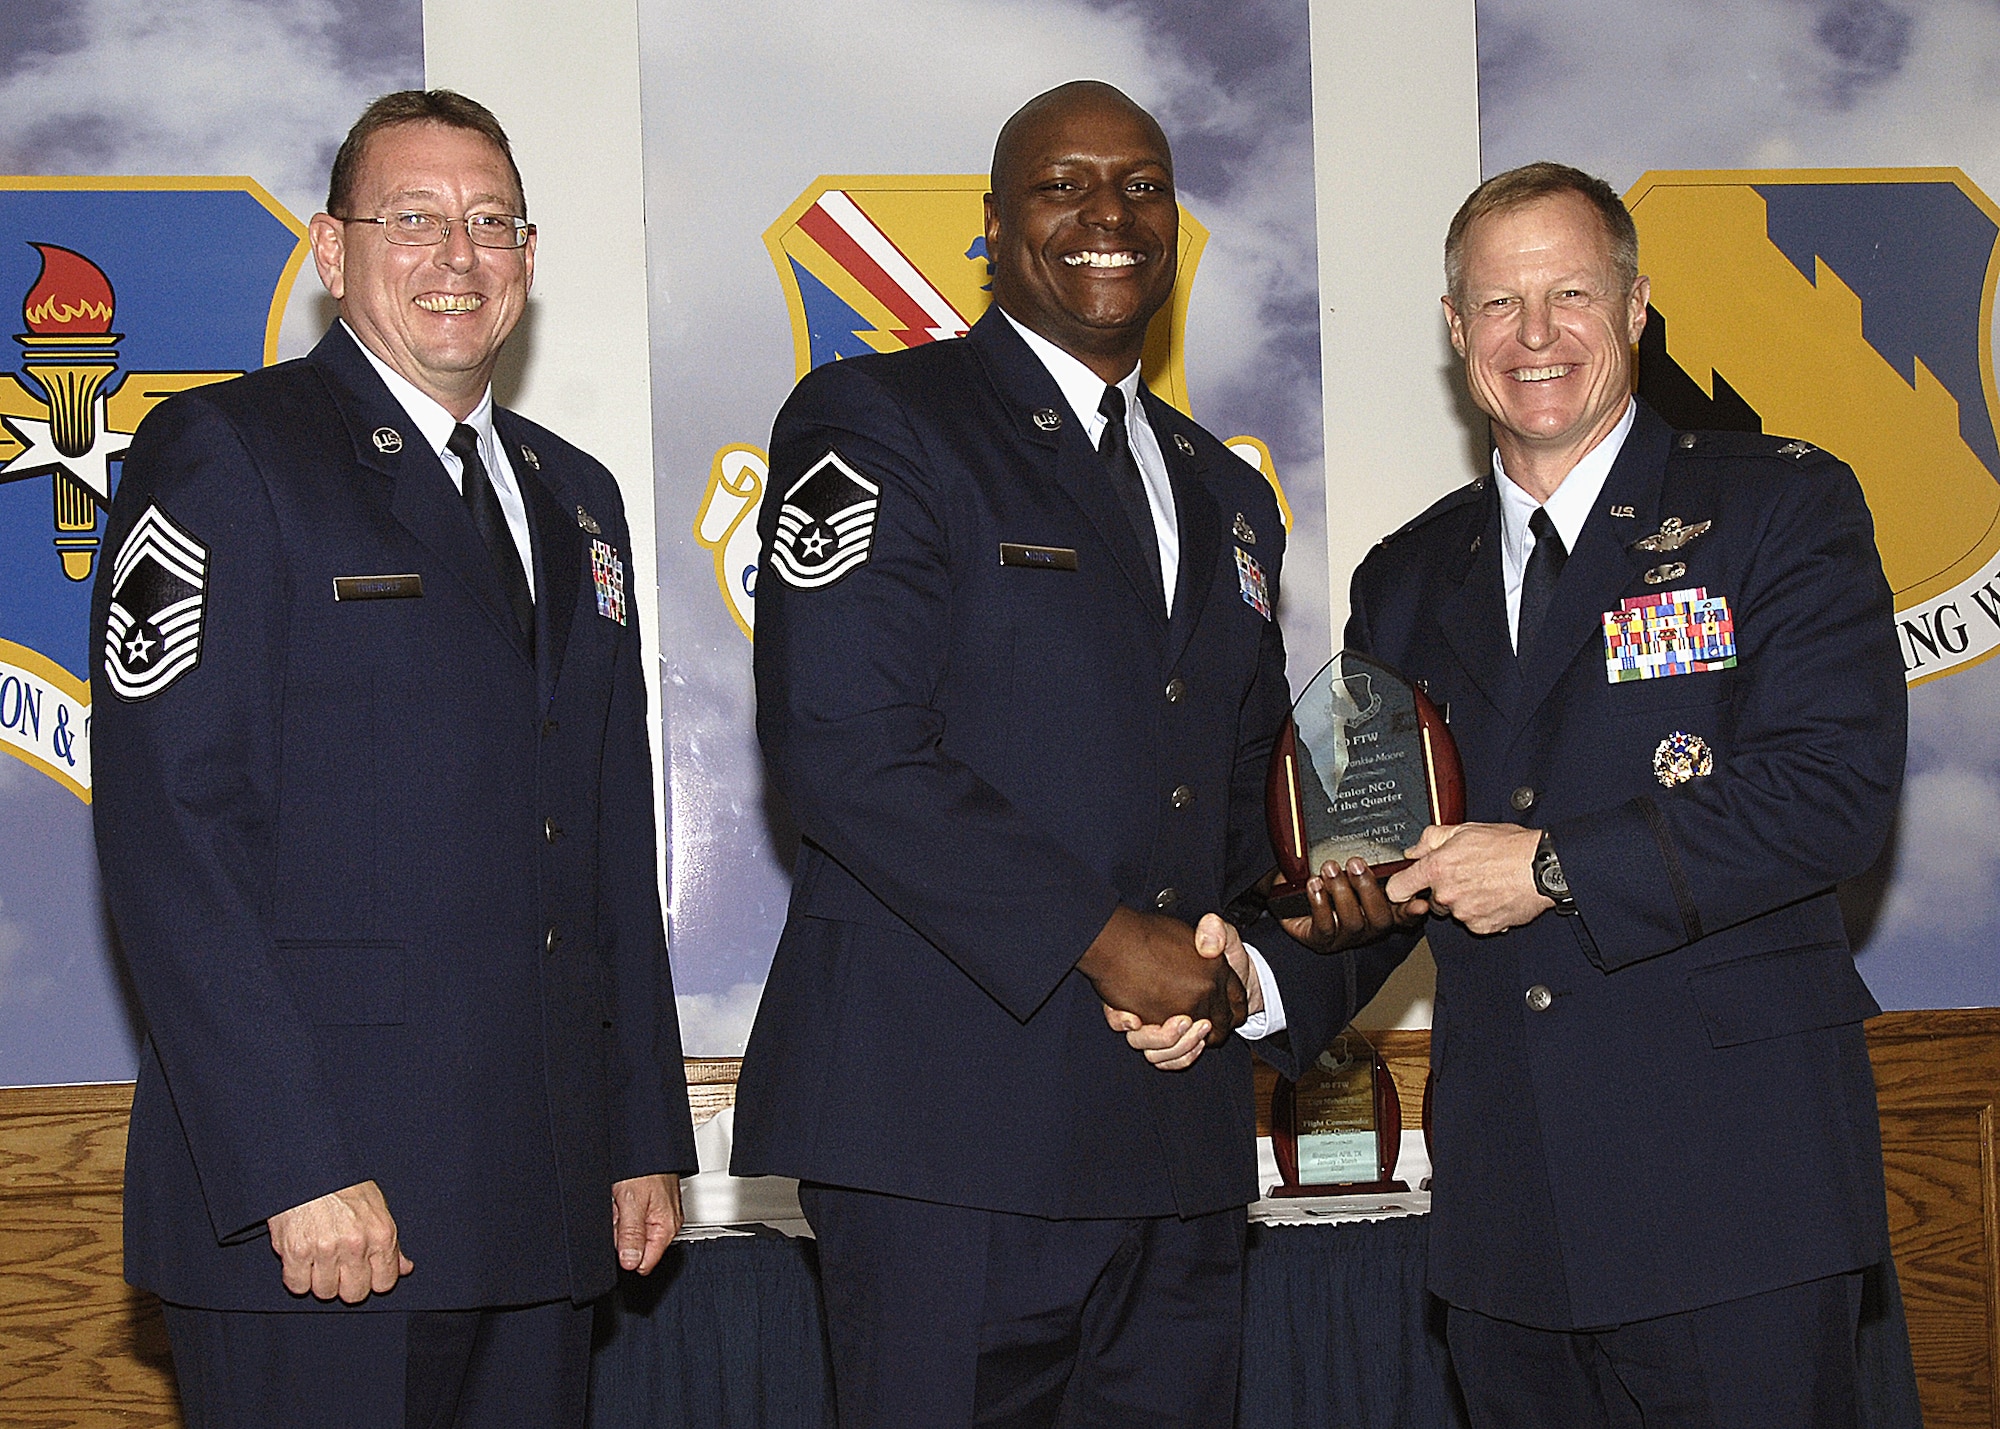 Master Sgt. Frankie Moore, 80th Flying Training Wing, accepts the Senior NCO of the Quarter award from 80th Flying Training Wing Commander Col. David Petersen April 22 during the wing's quarterly award ceremony. Sergeant Moore was recognized for managing a $248 million aircraft contract, as well as providing key support for a recent inspection. The sergeant is also active in the community, providing support as a victim advocate and collecting and distributing 38 computers to underprivileged children. Also pictured is 80th FTW Superintendent Chief Master Sgt. Norman Theirolf. (U.S. Air Force photos/Harry Tonemah)